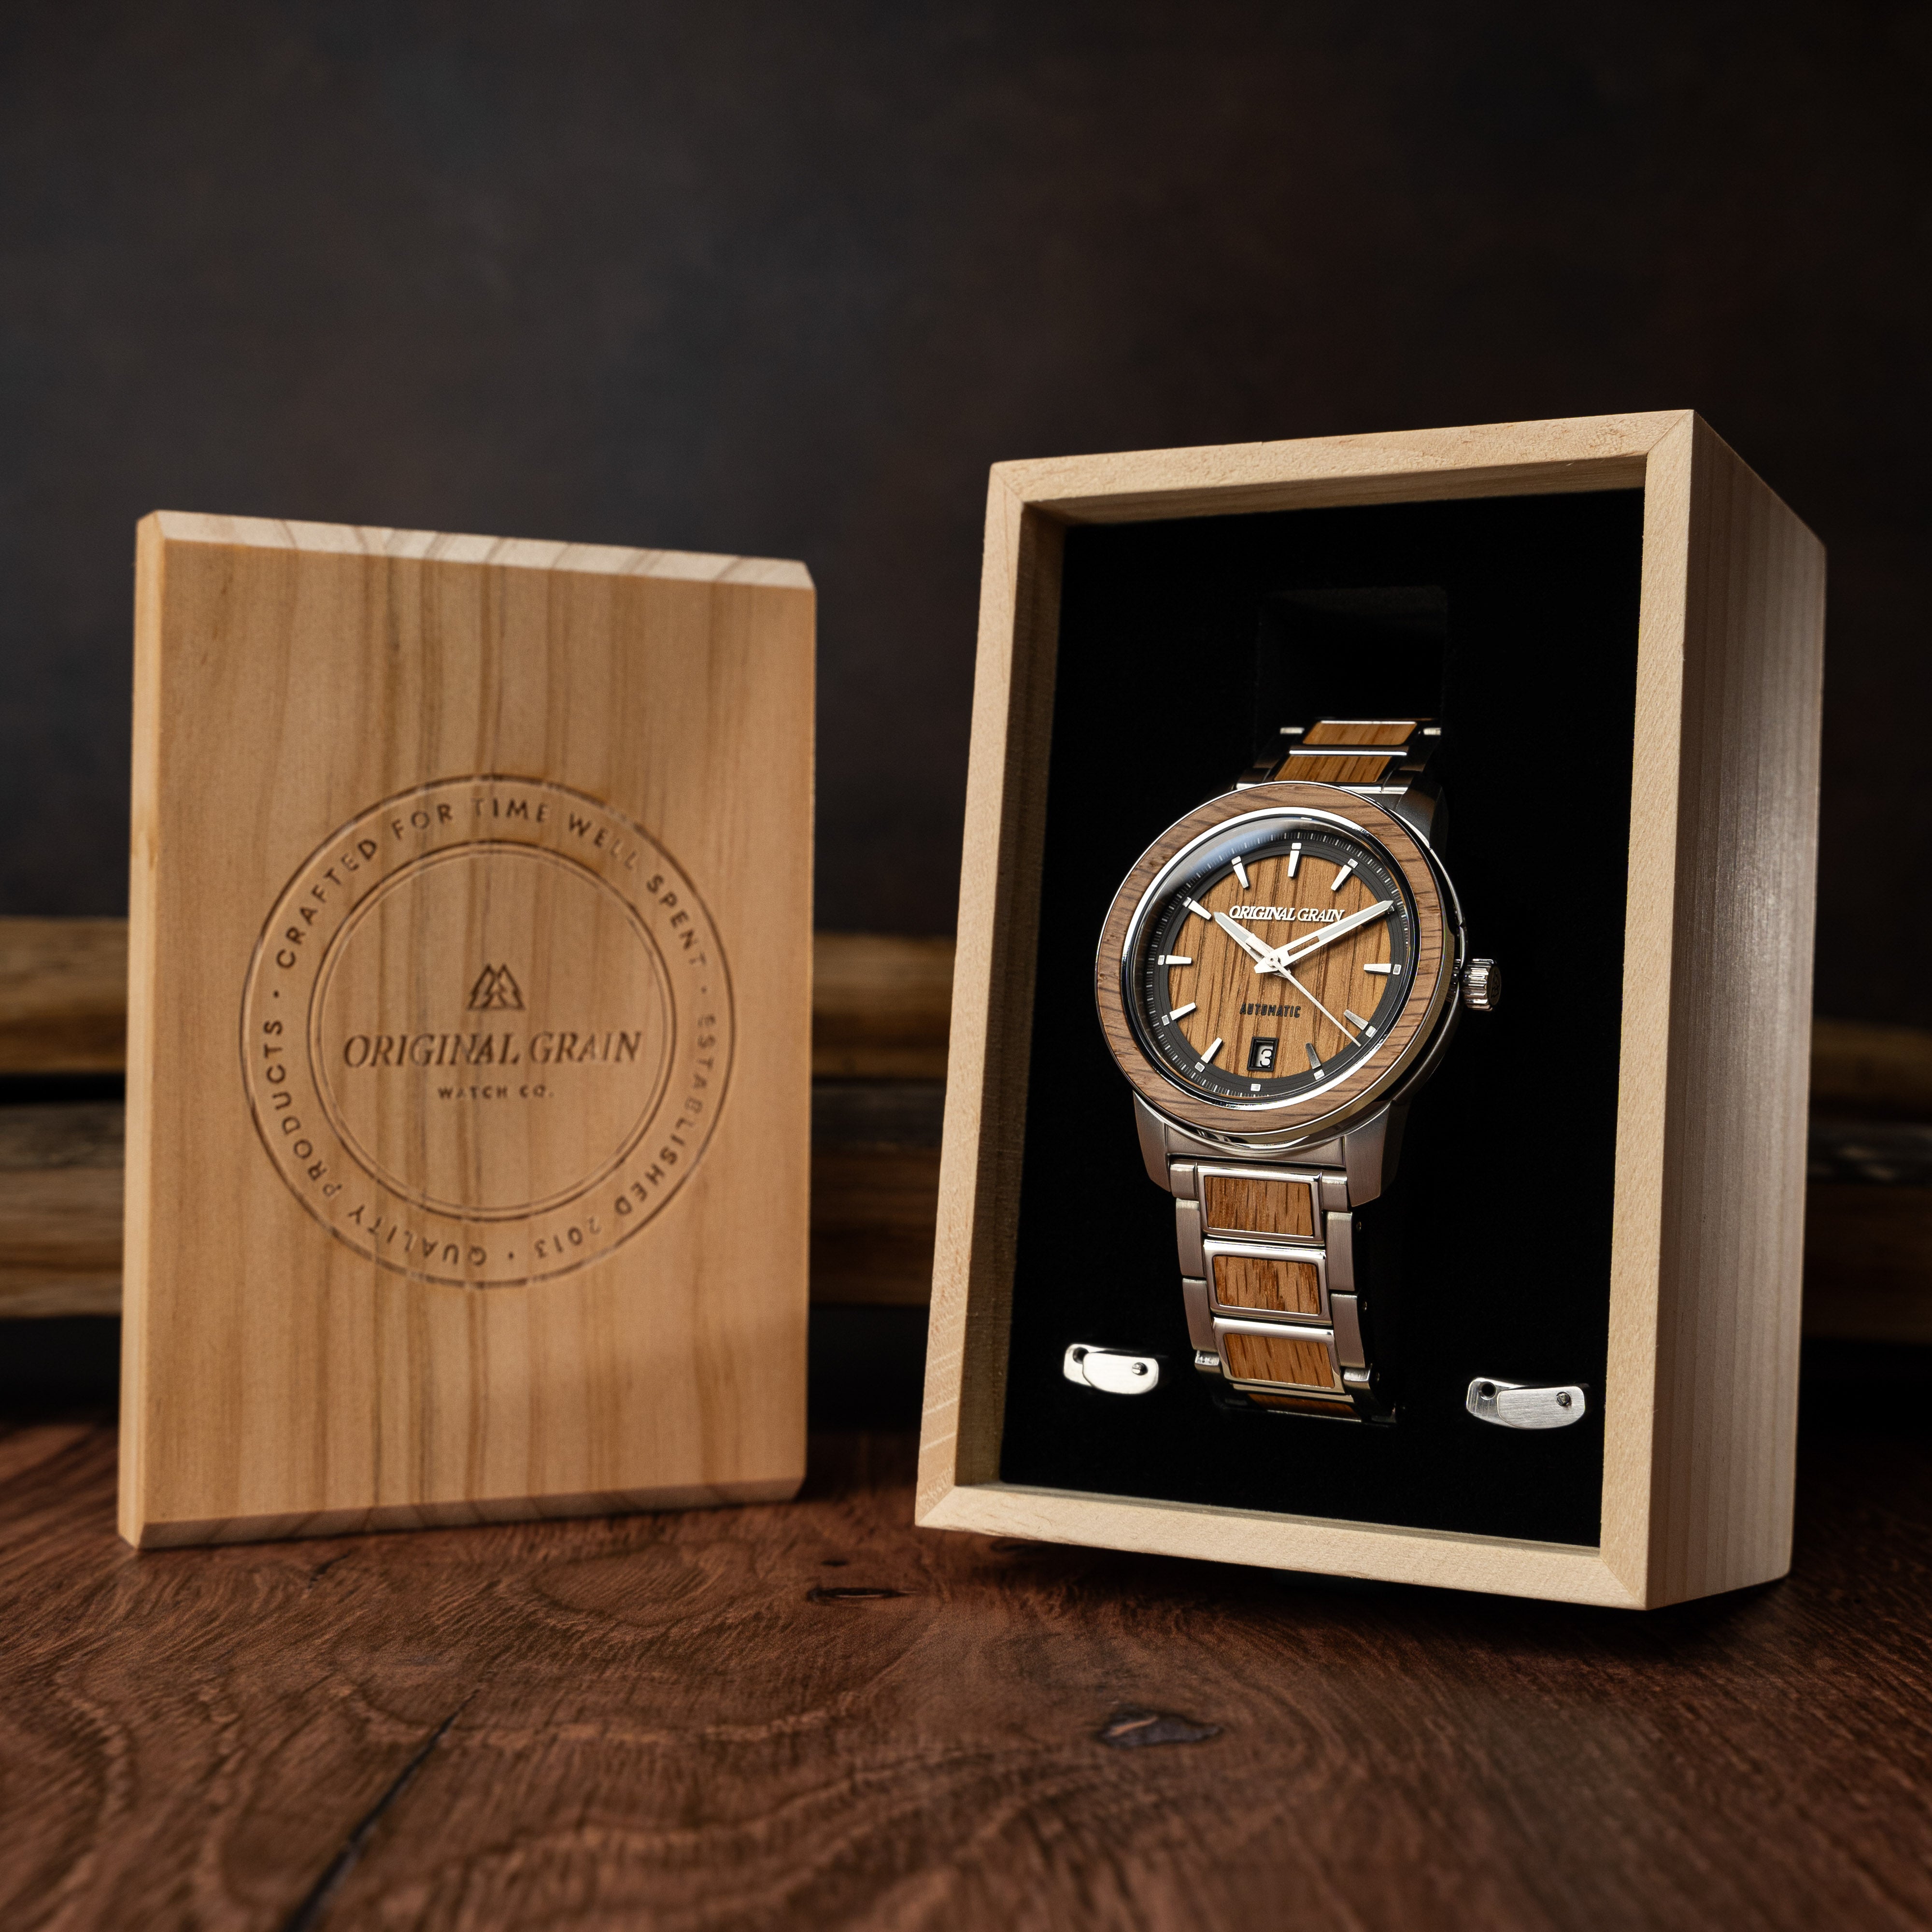 Original Grain Launches Limited-Edition World Series Watch In Partnership  With Iconic Baseball Brand, Rawlings®